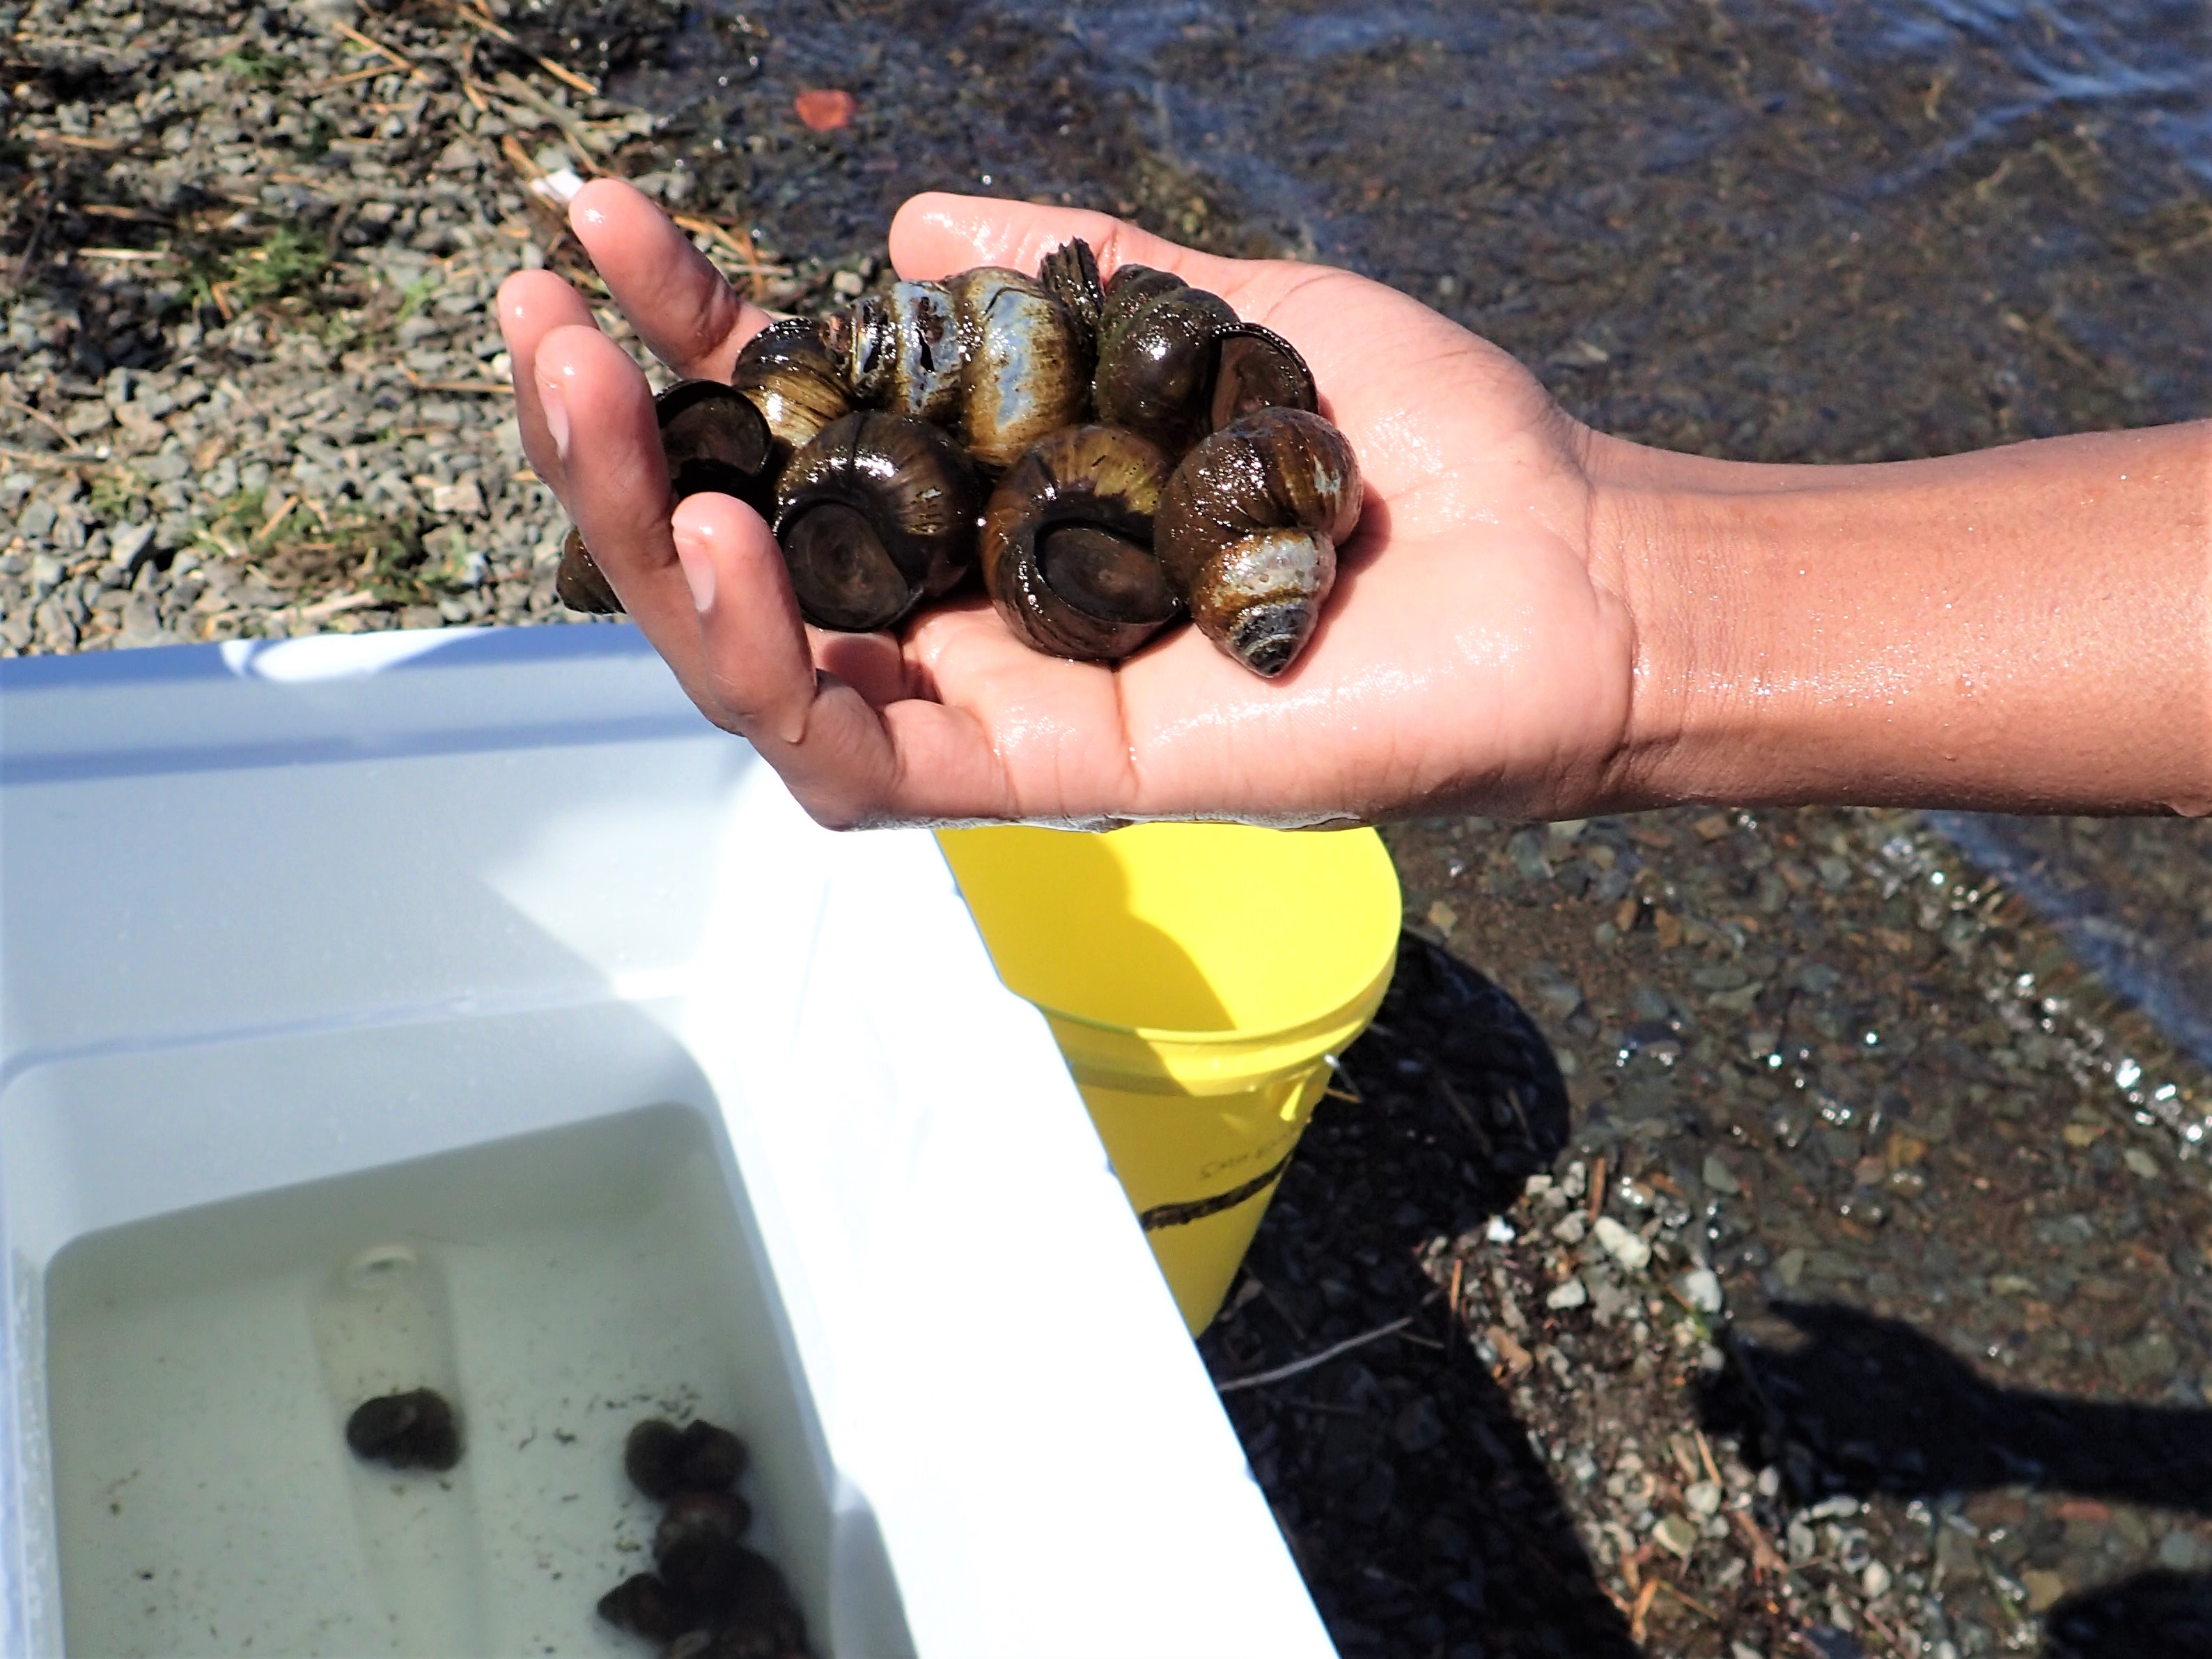 A hand holding a number of large Chinese mystery snails recently collected from a lake. In the backgroud is a white cooler full of water and snails with a yellow collecting bucket.